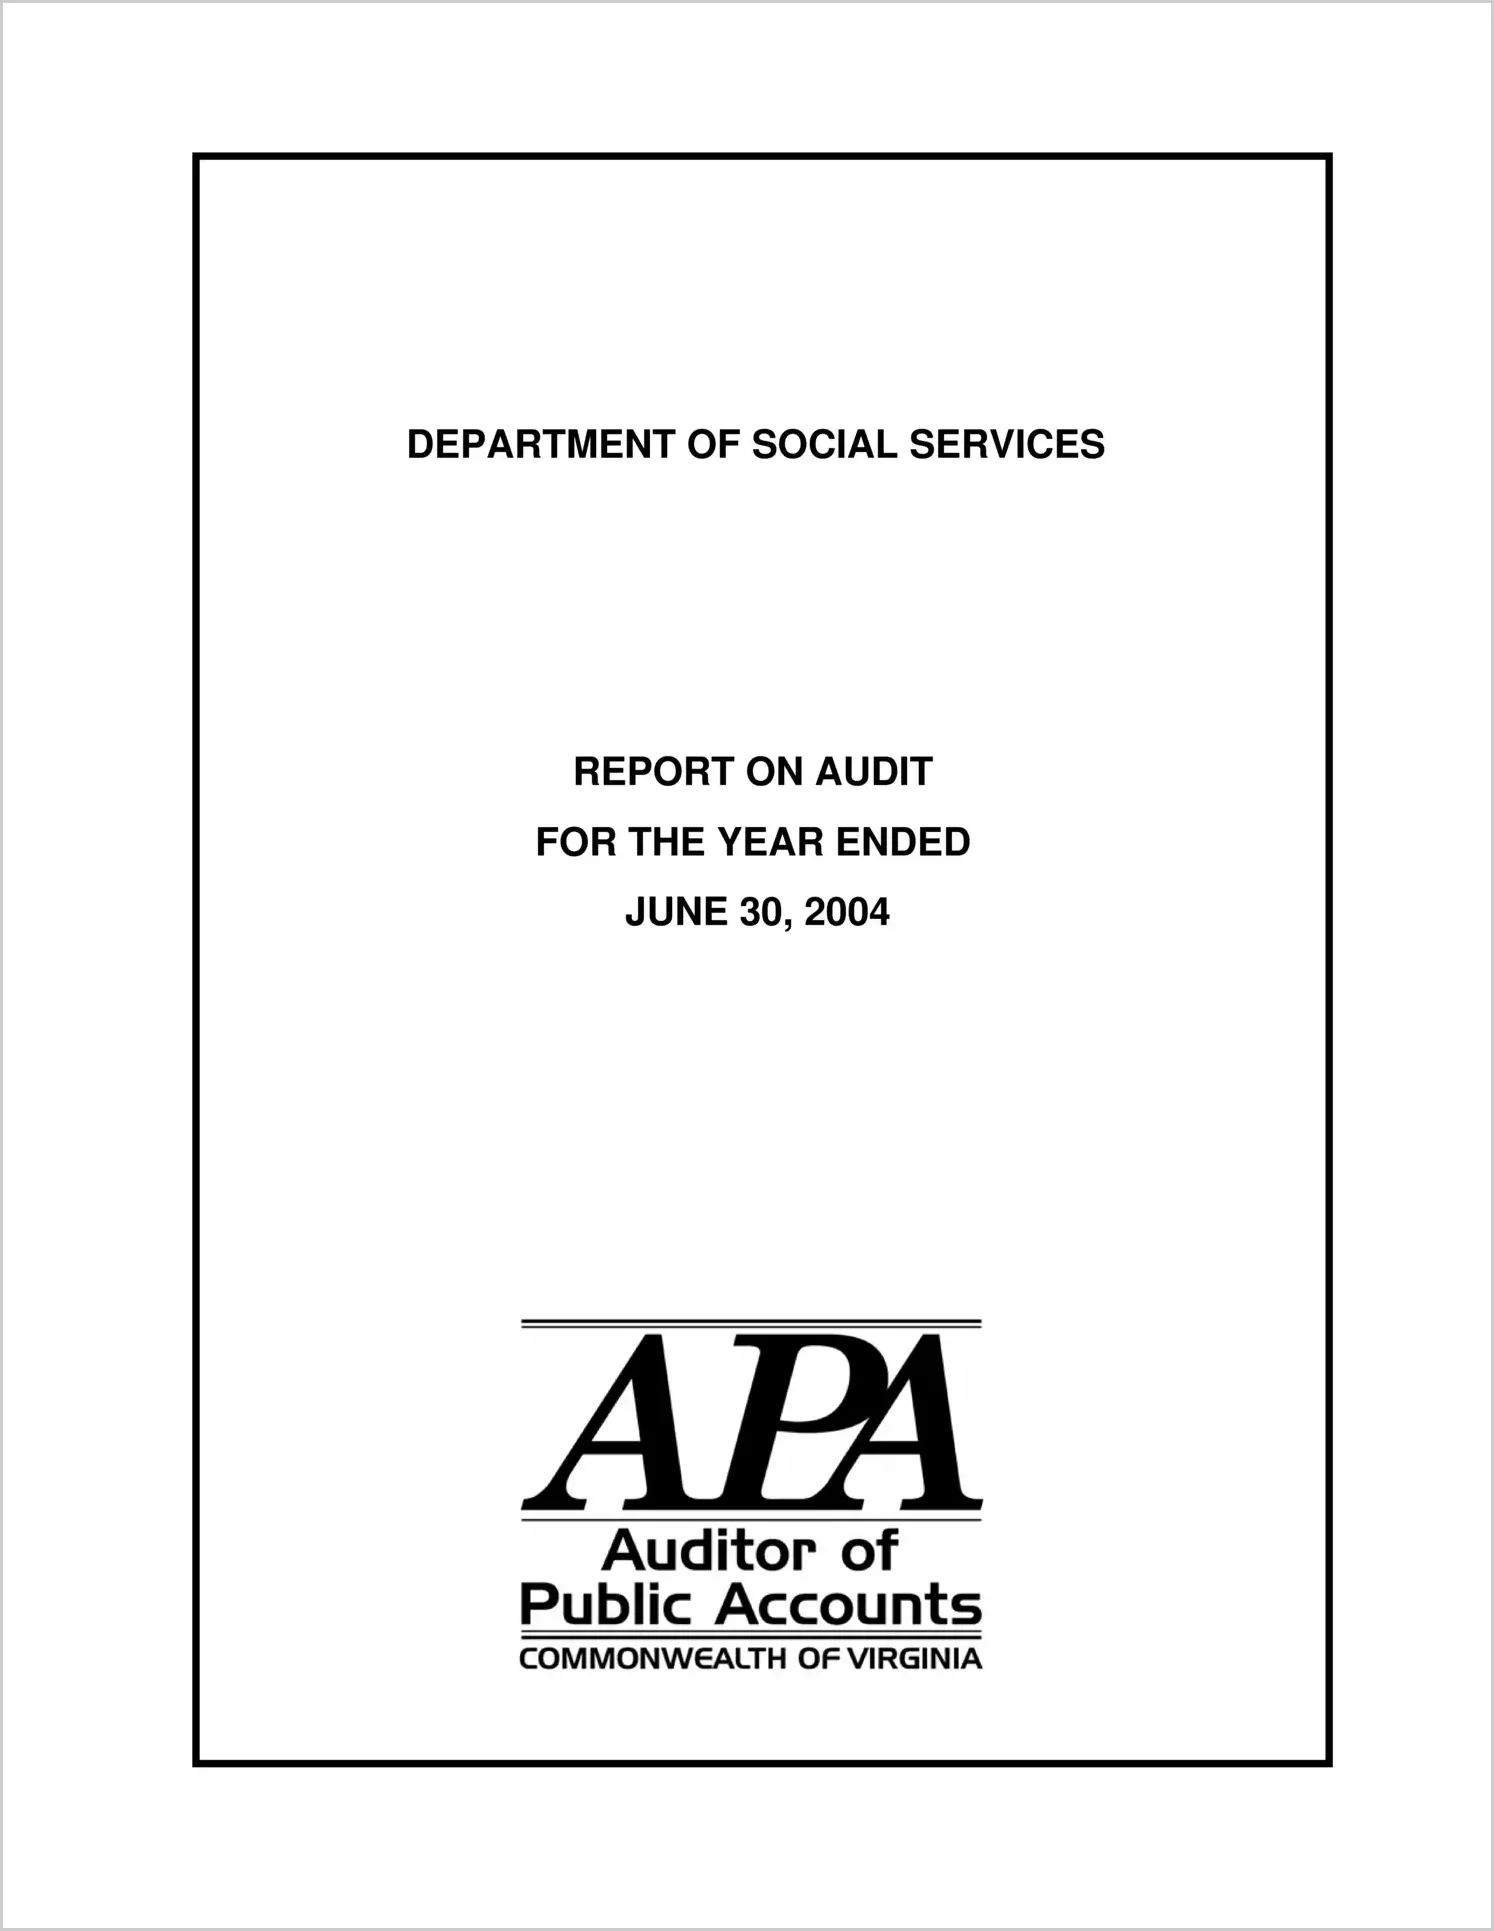 Department of Social Services for the year ended June 30, 2004